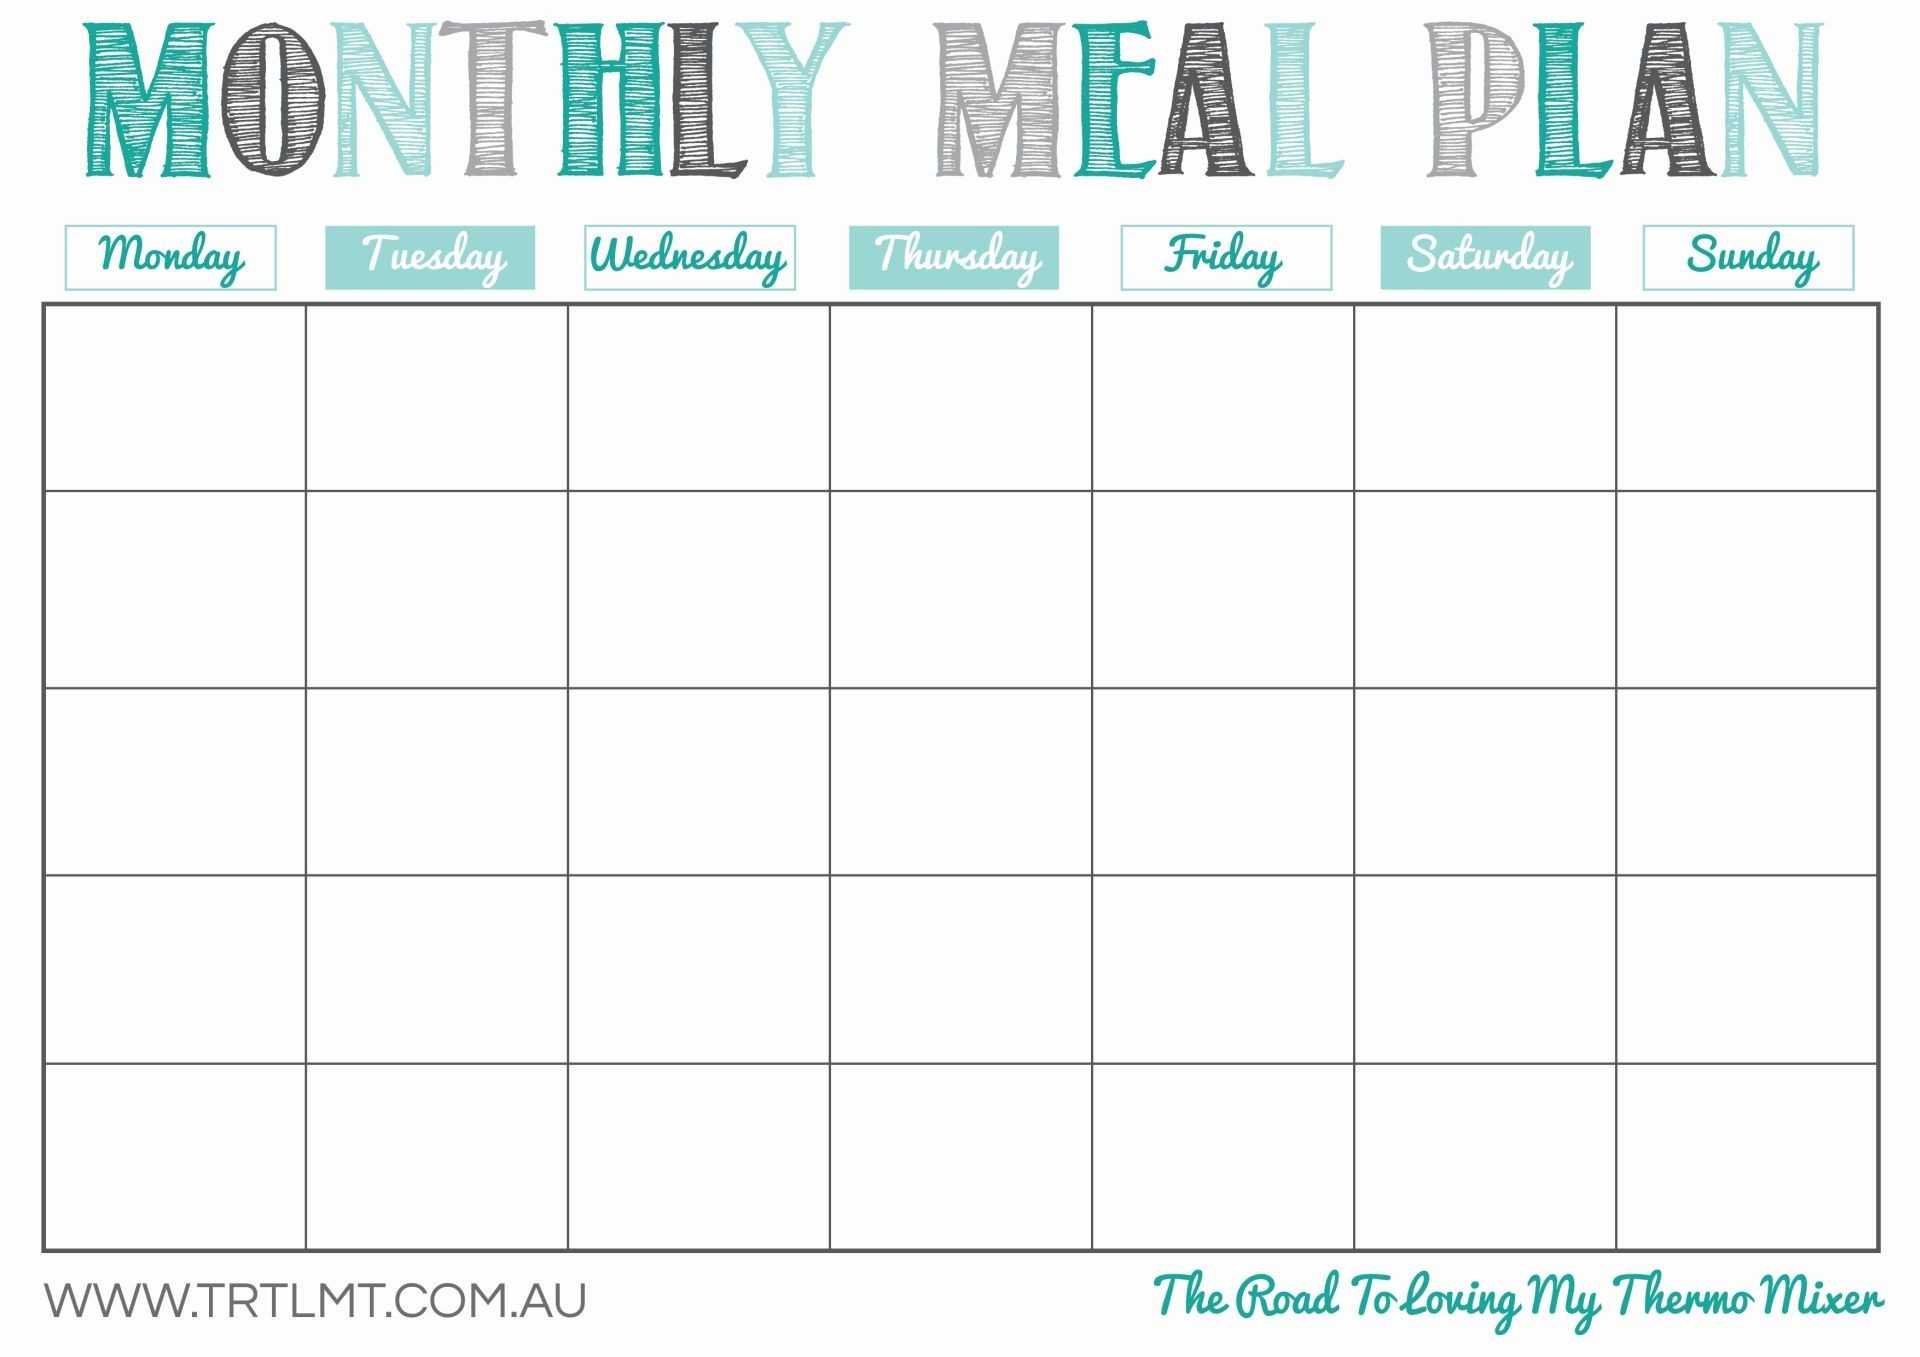 New Meal Planning Calendar Printable | Free Printable With Regard To Meal Plan Template Word